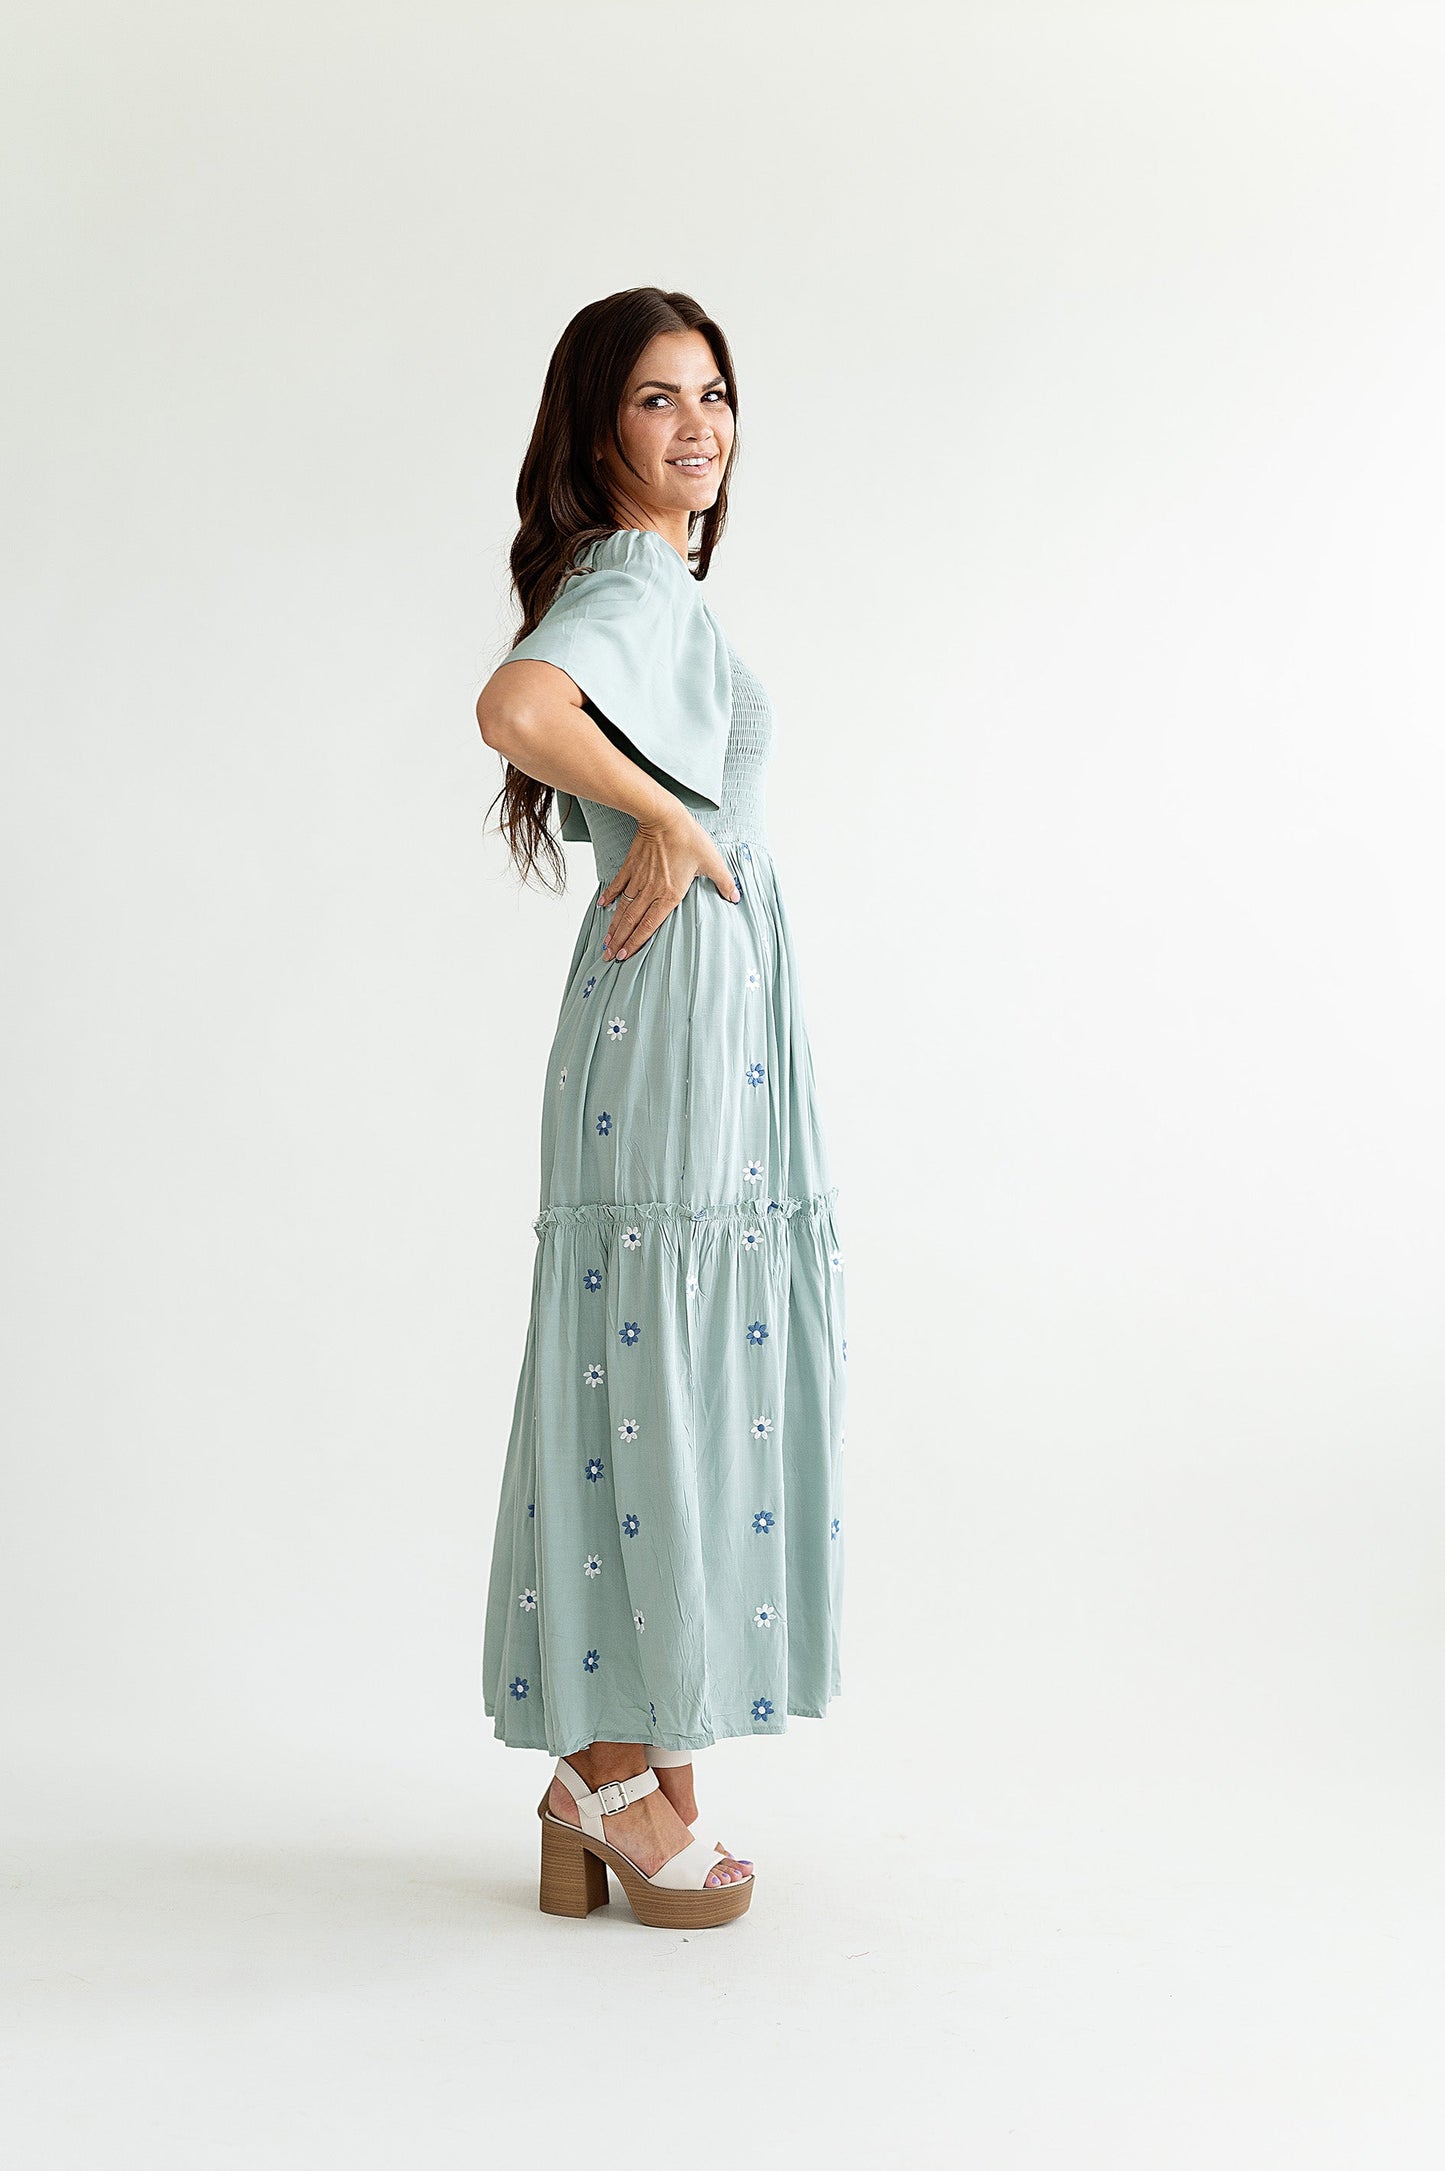 yayaq™-Clementine Embroidered Dress in Dusty Blue